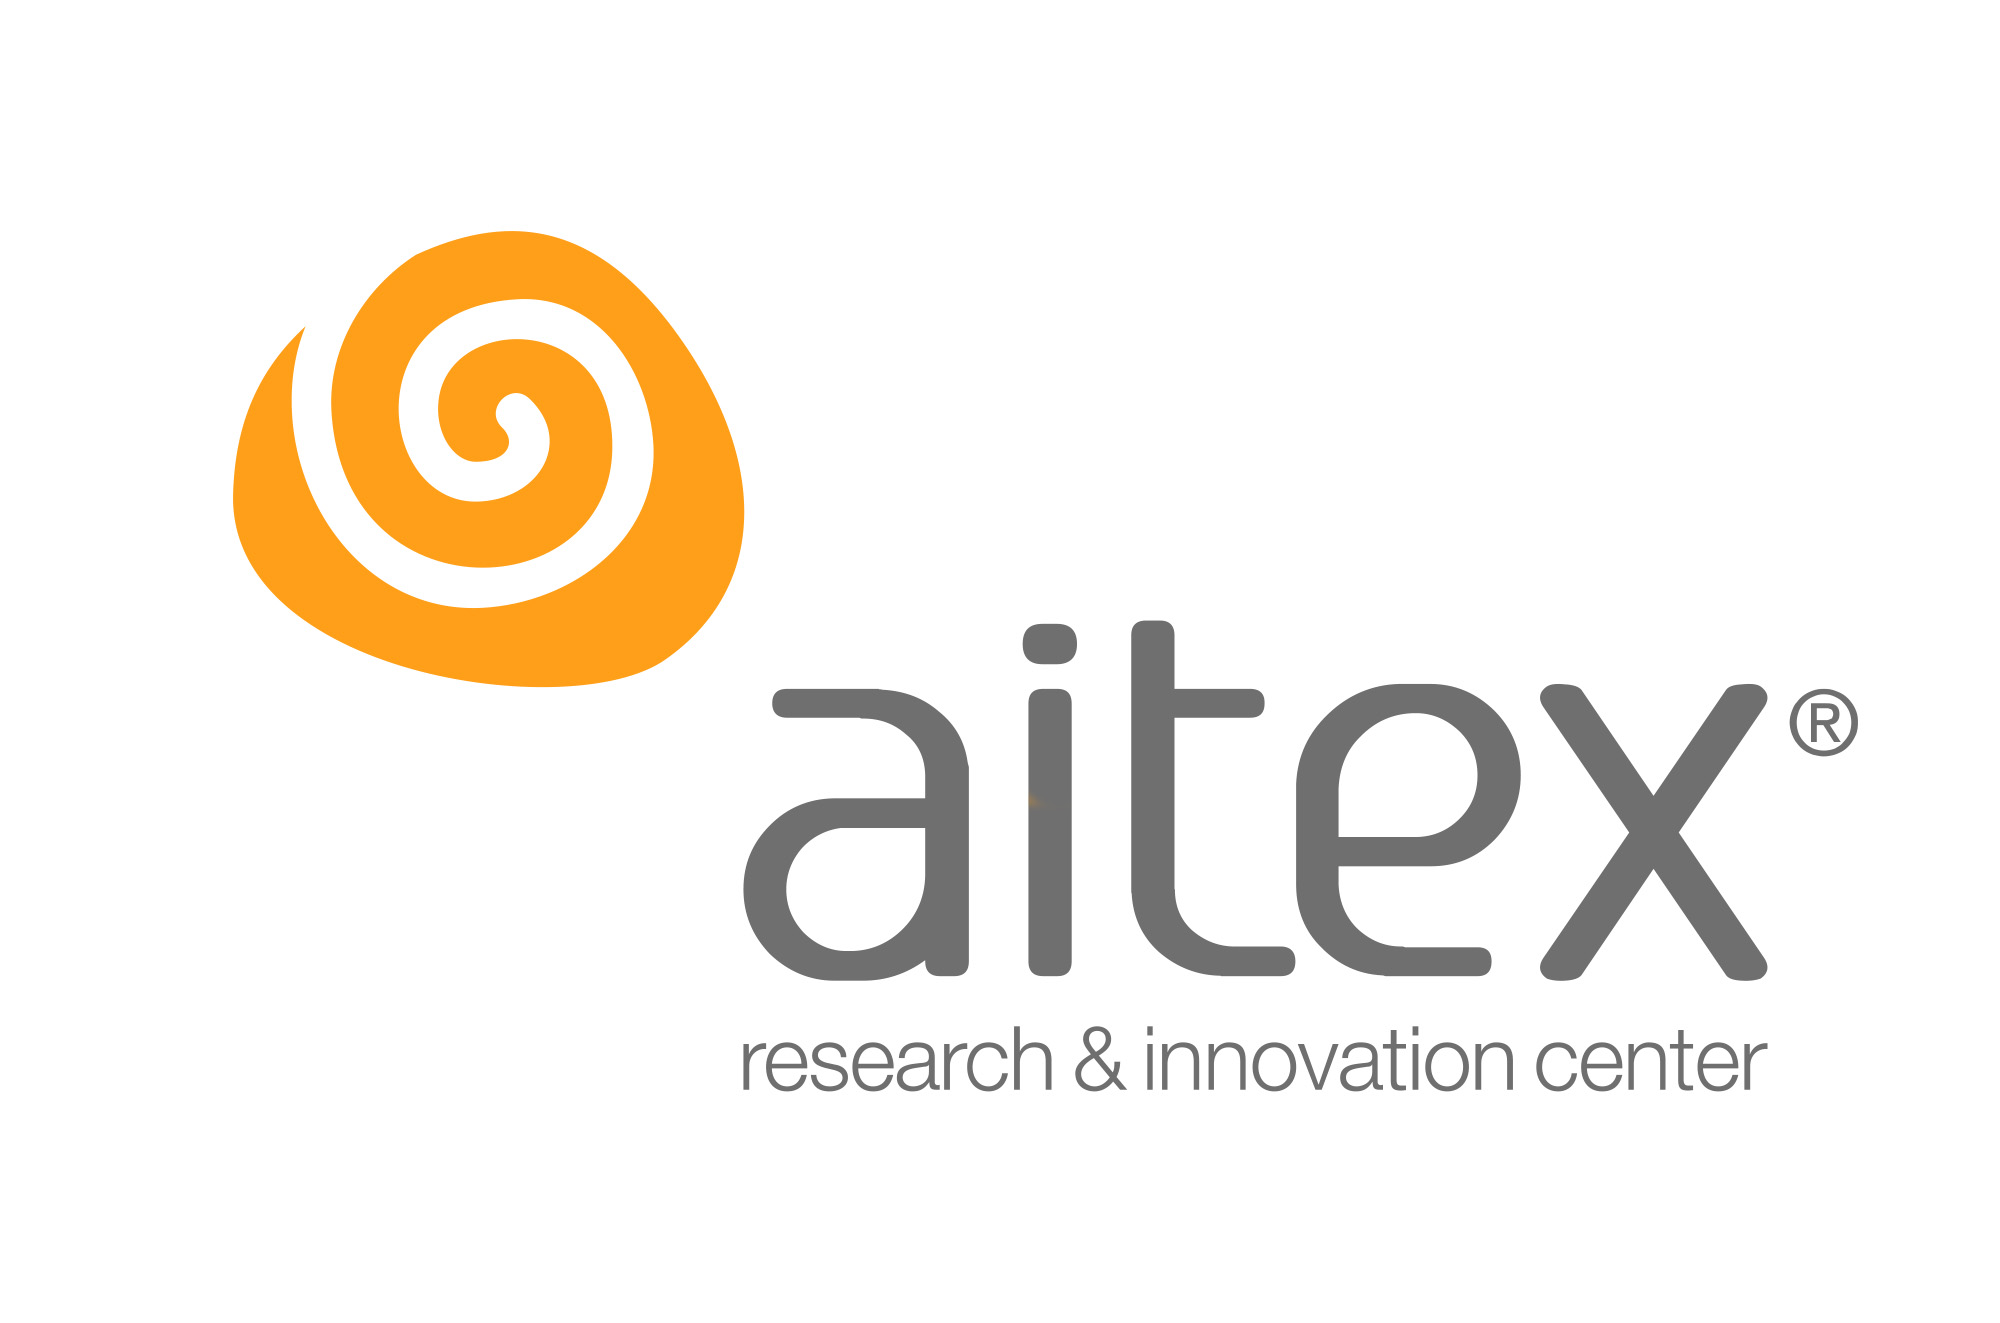 Aitex - research & innovation center